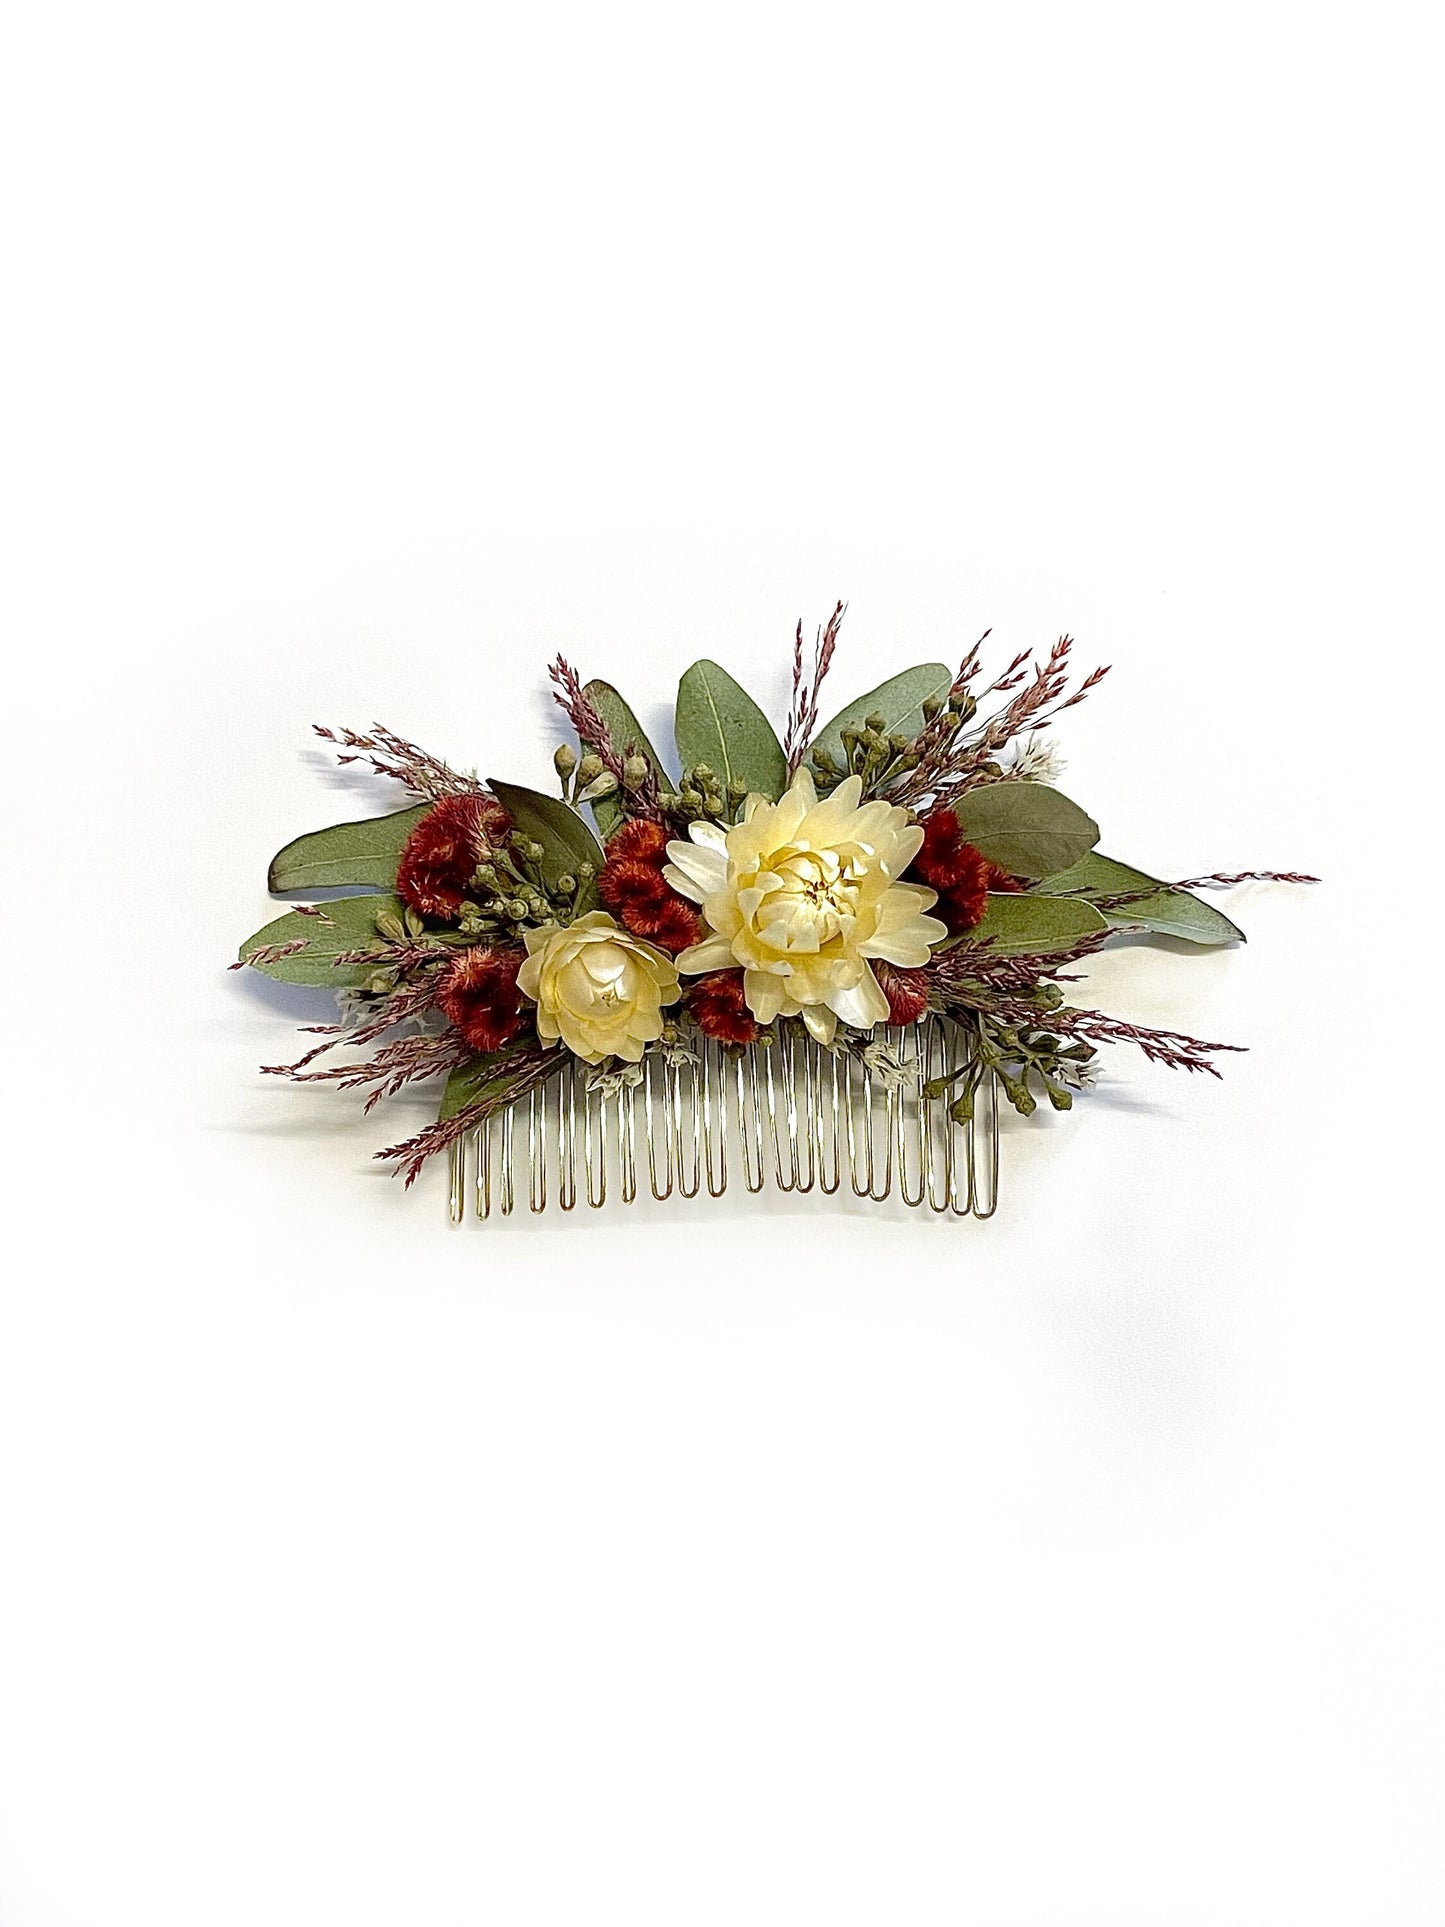 Christmas Bouquet, Dried Flowers, Bridal, Preserved Floral, Coxcomb, Strawflower, Greenery, Red and Green, Ruby silk, Burgundy